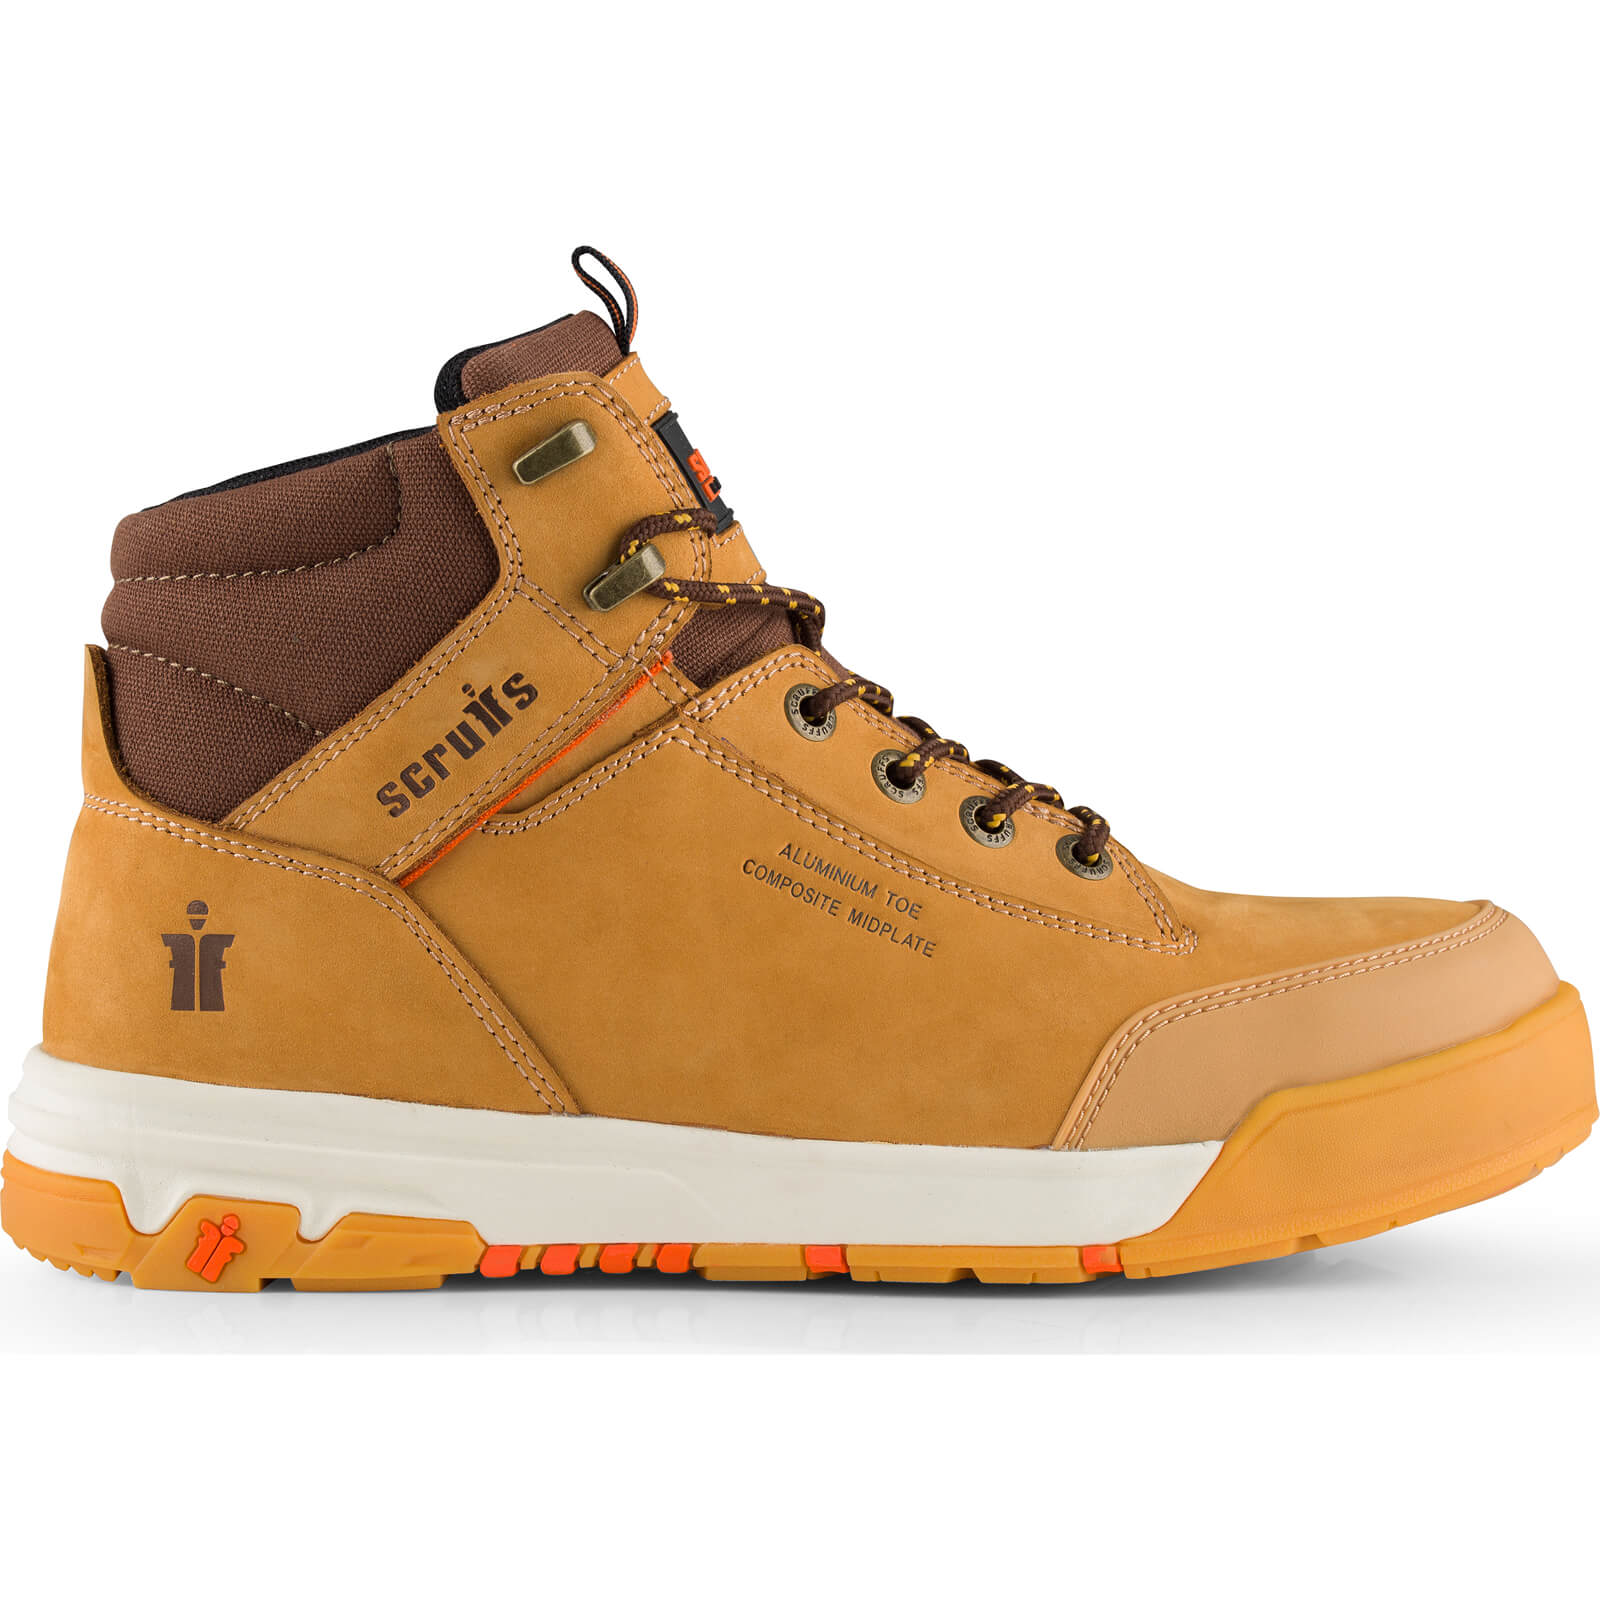 Image of Scruffs Switchback 3 Work Boot Tan Size 9